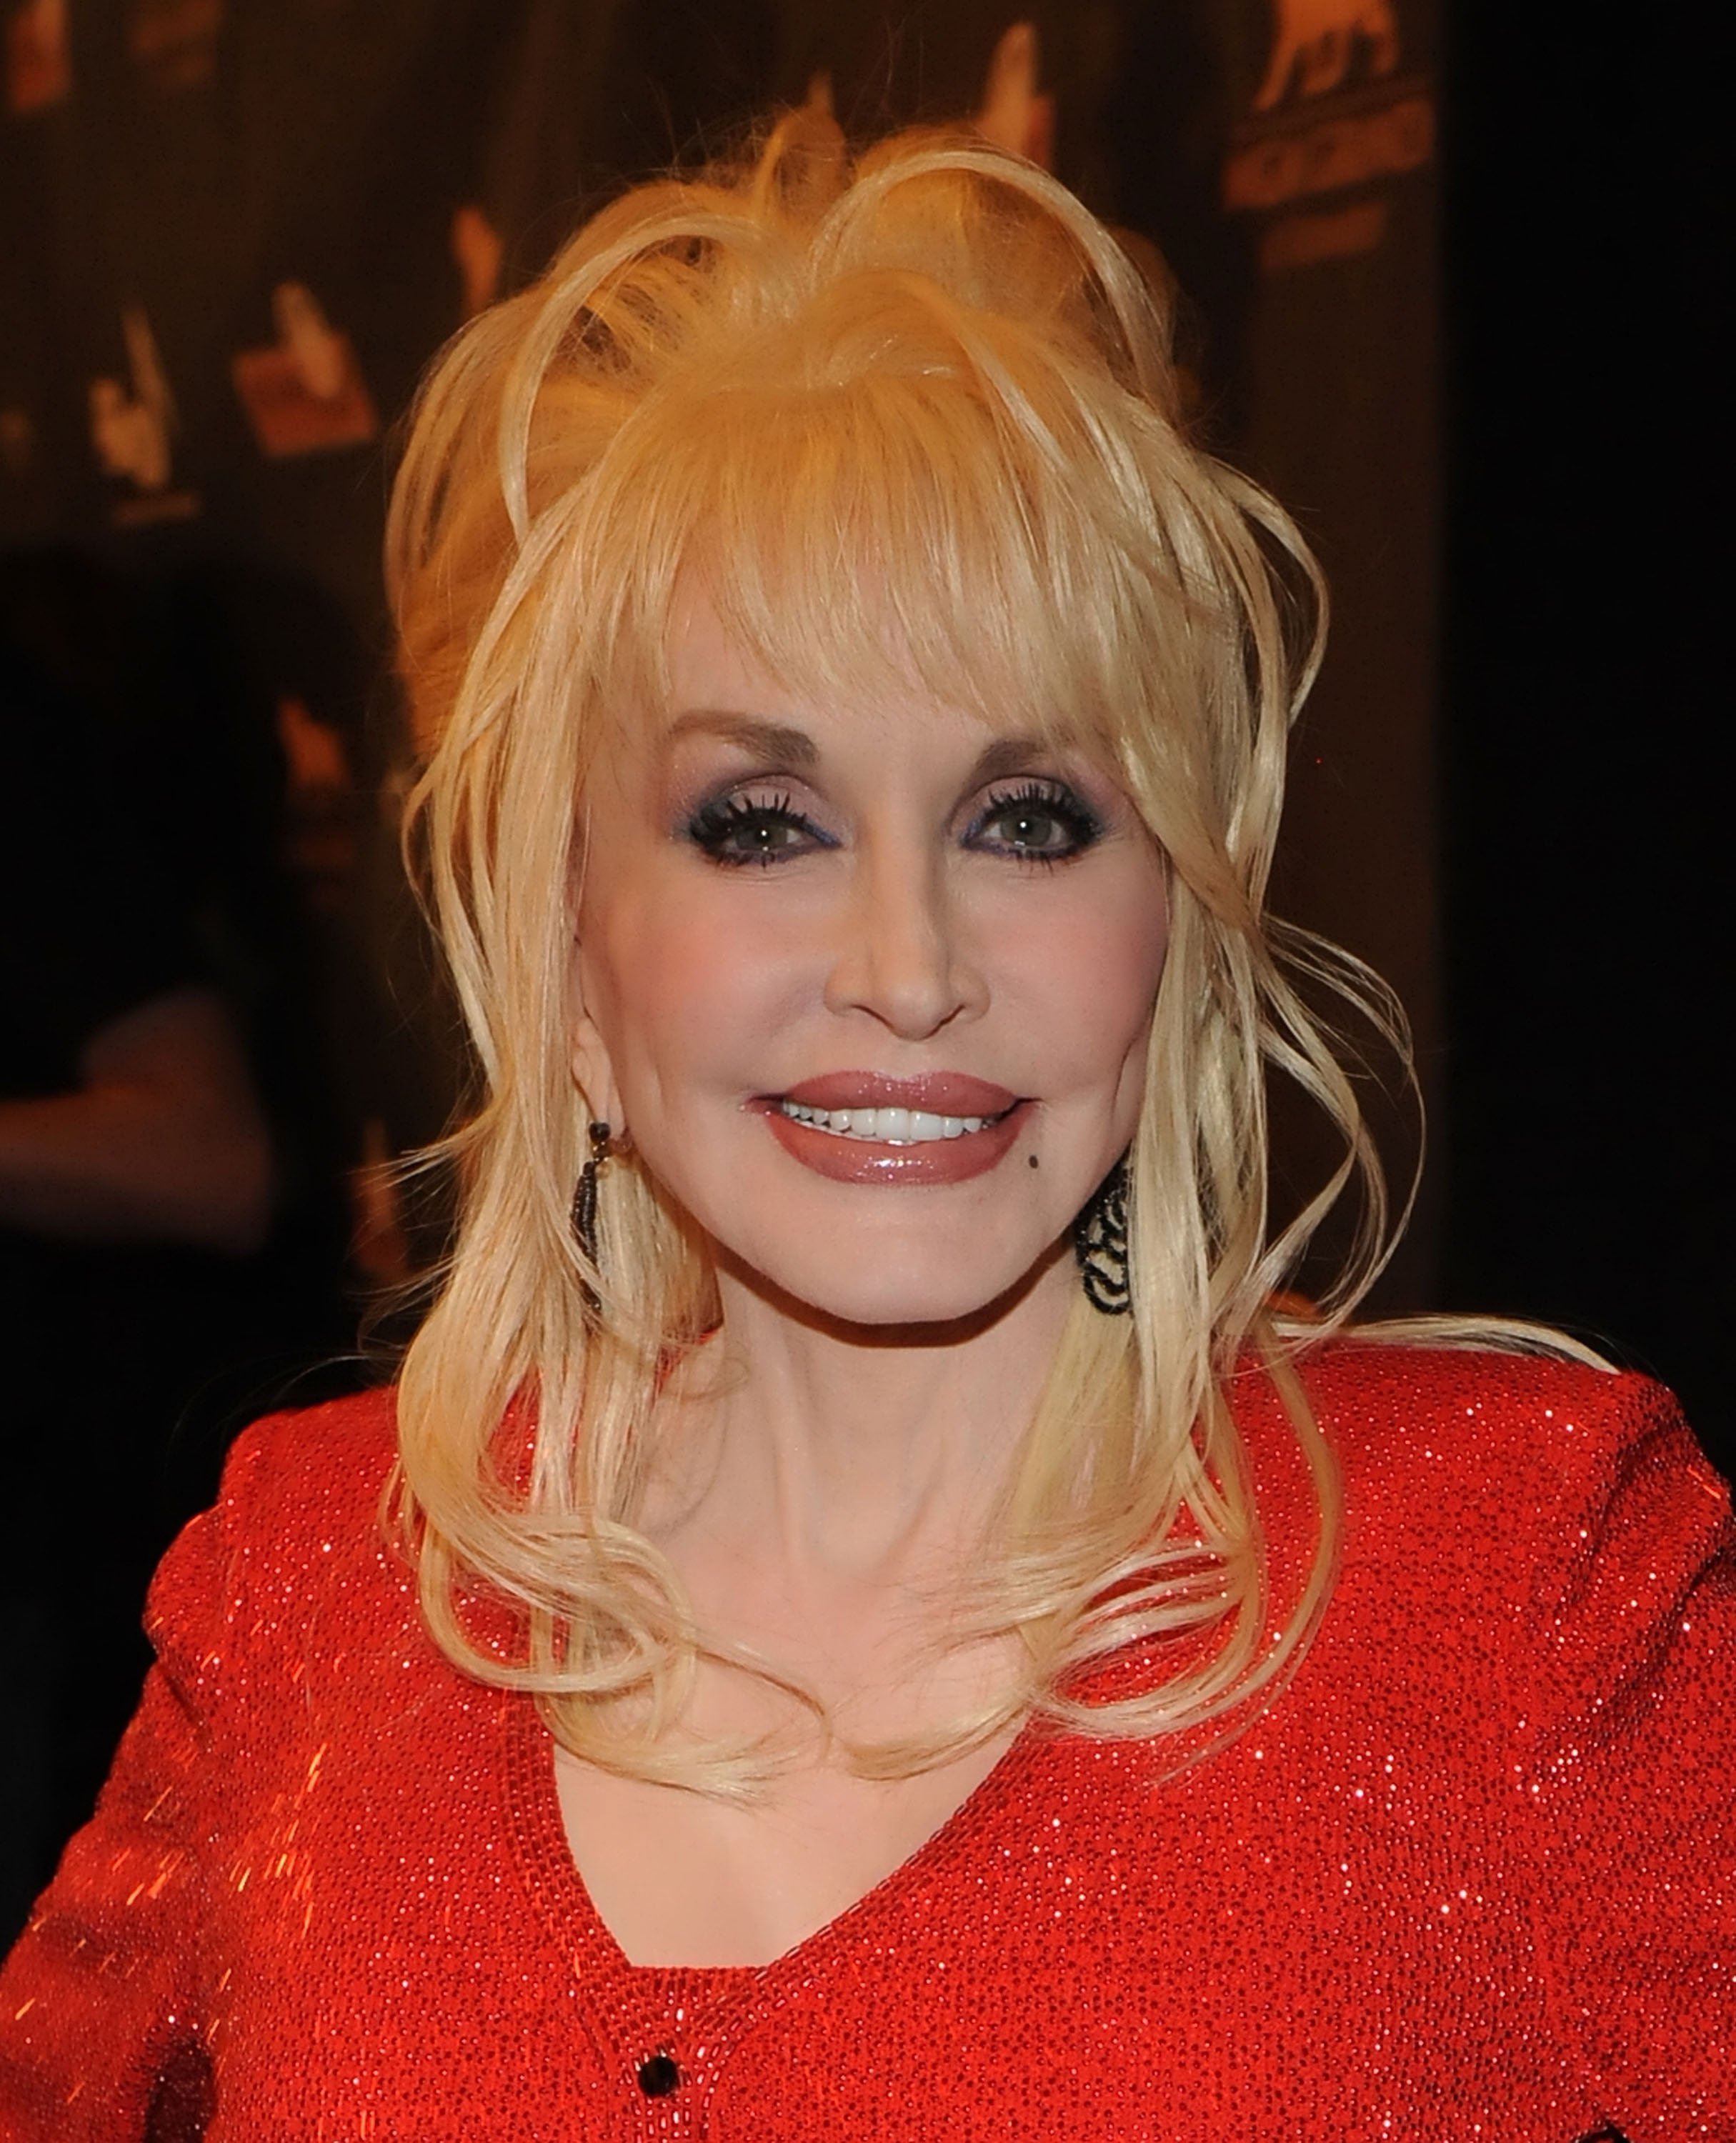 Dolly Parton attends the Kenny Rogers: The First 50 Years award show at the MGM Grand at Foxwoods on April 10, 2010, in Ledyard Center, Connecticut. | Source: Getty Images.